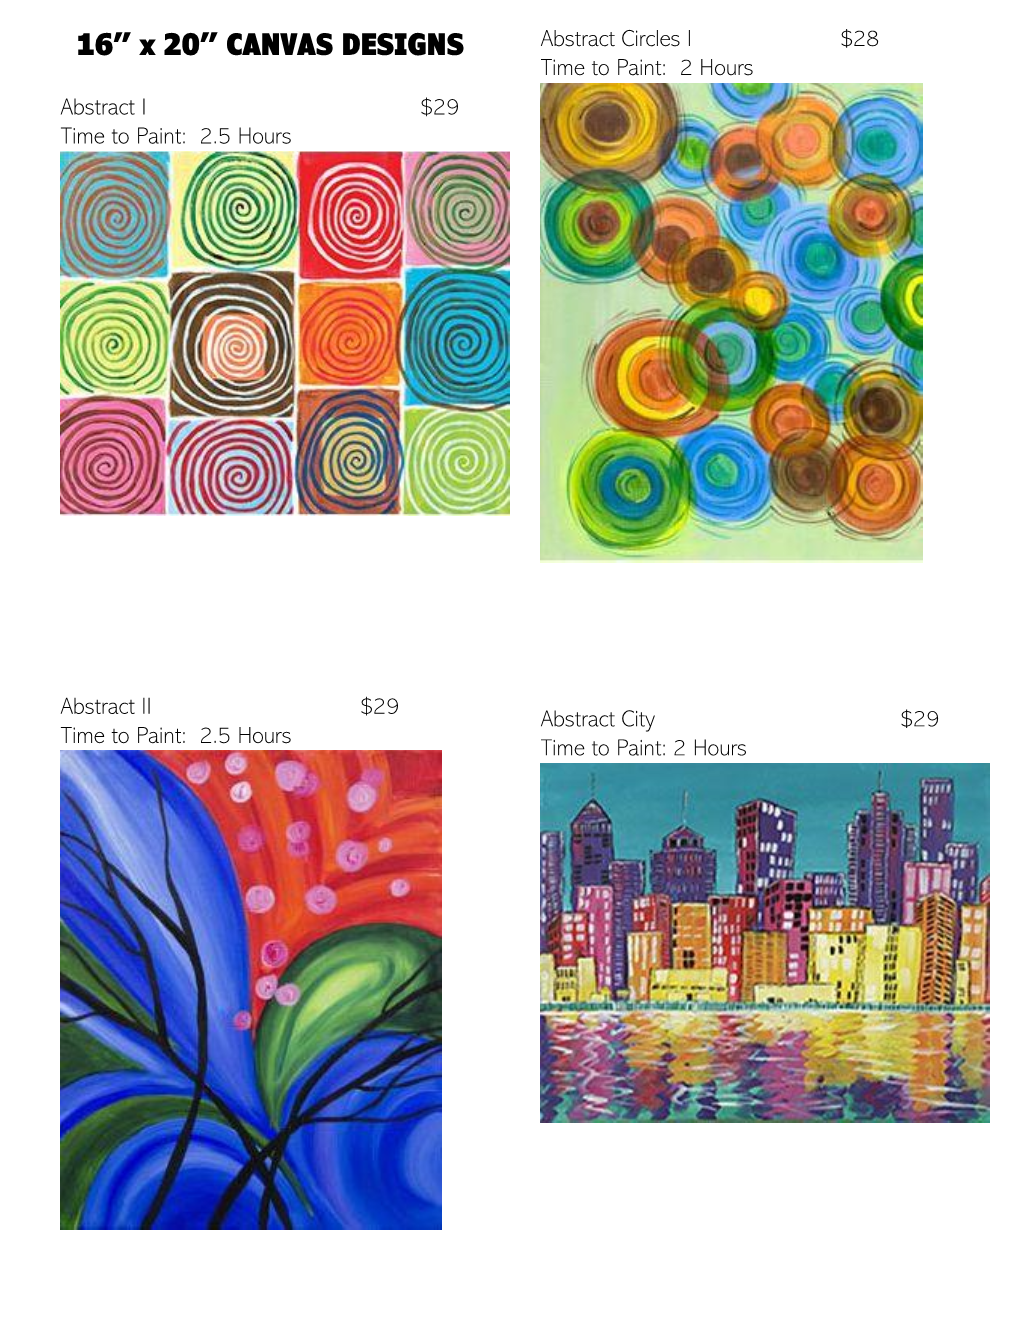 16” X 20” CANVAS DESIGNS Abstract Circles I $28 Time to Paint: 2 Hours Abstract I $29 Time to Paint: 2.5 Hours